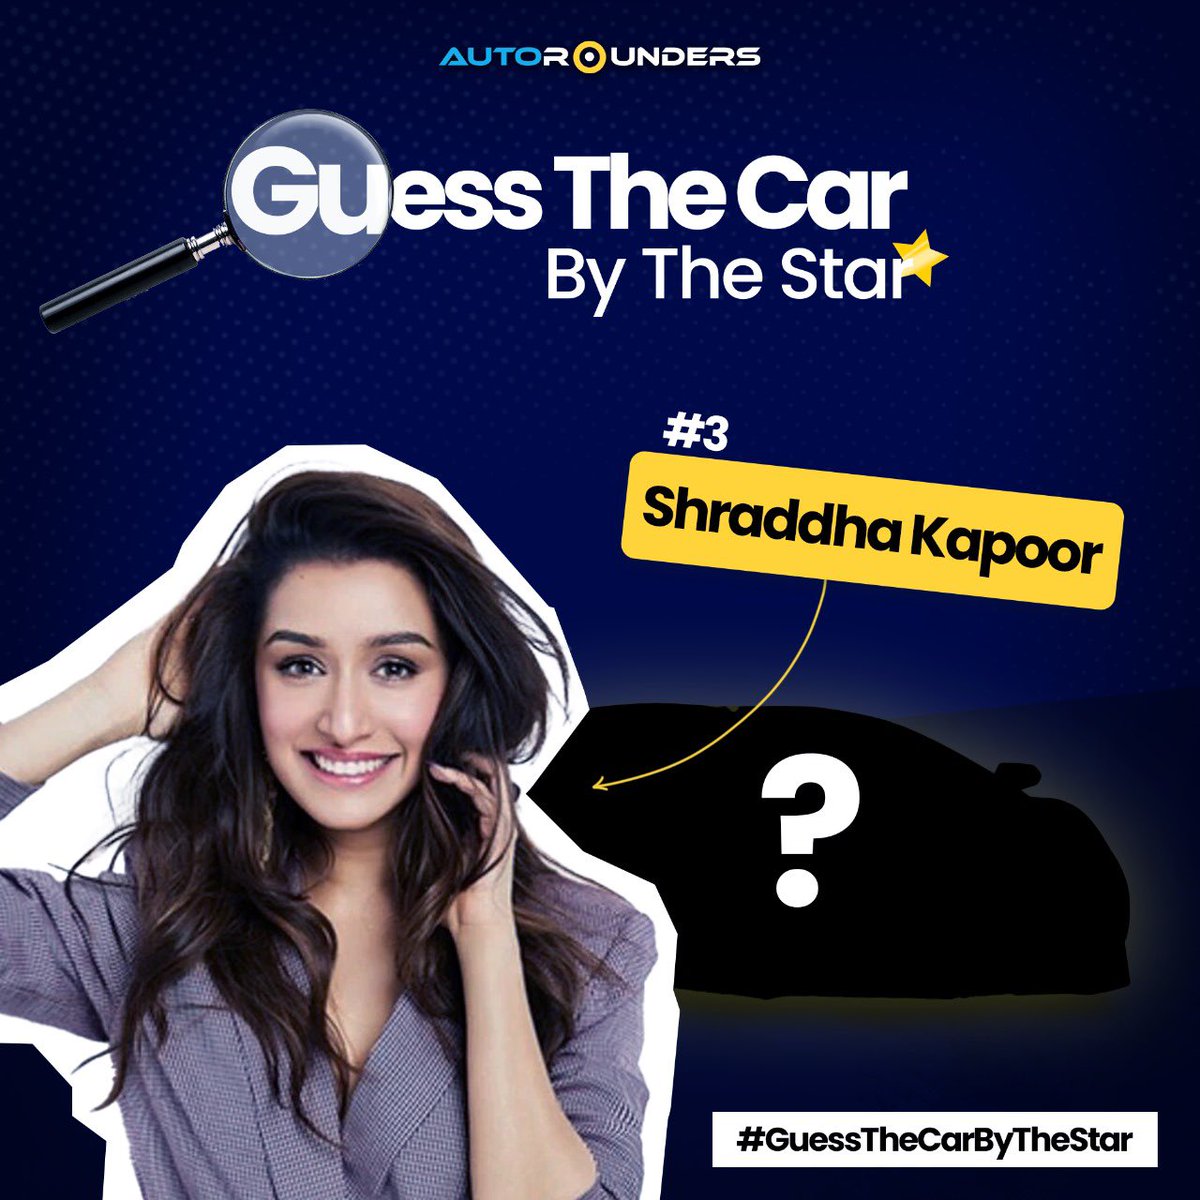 Celebrating 200K Youtube Subscribers with #GuessTheCarByTheStar 💫 Simply identify the car brand associated with the Celebrity in our post and stand a chance to win awesome gift vouchers 🥳 #Autorounders #GuessTheCarByTheStar #Mumbai #Hyderabad #Pune #Thane #ThaneGBRoad